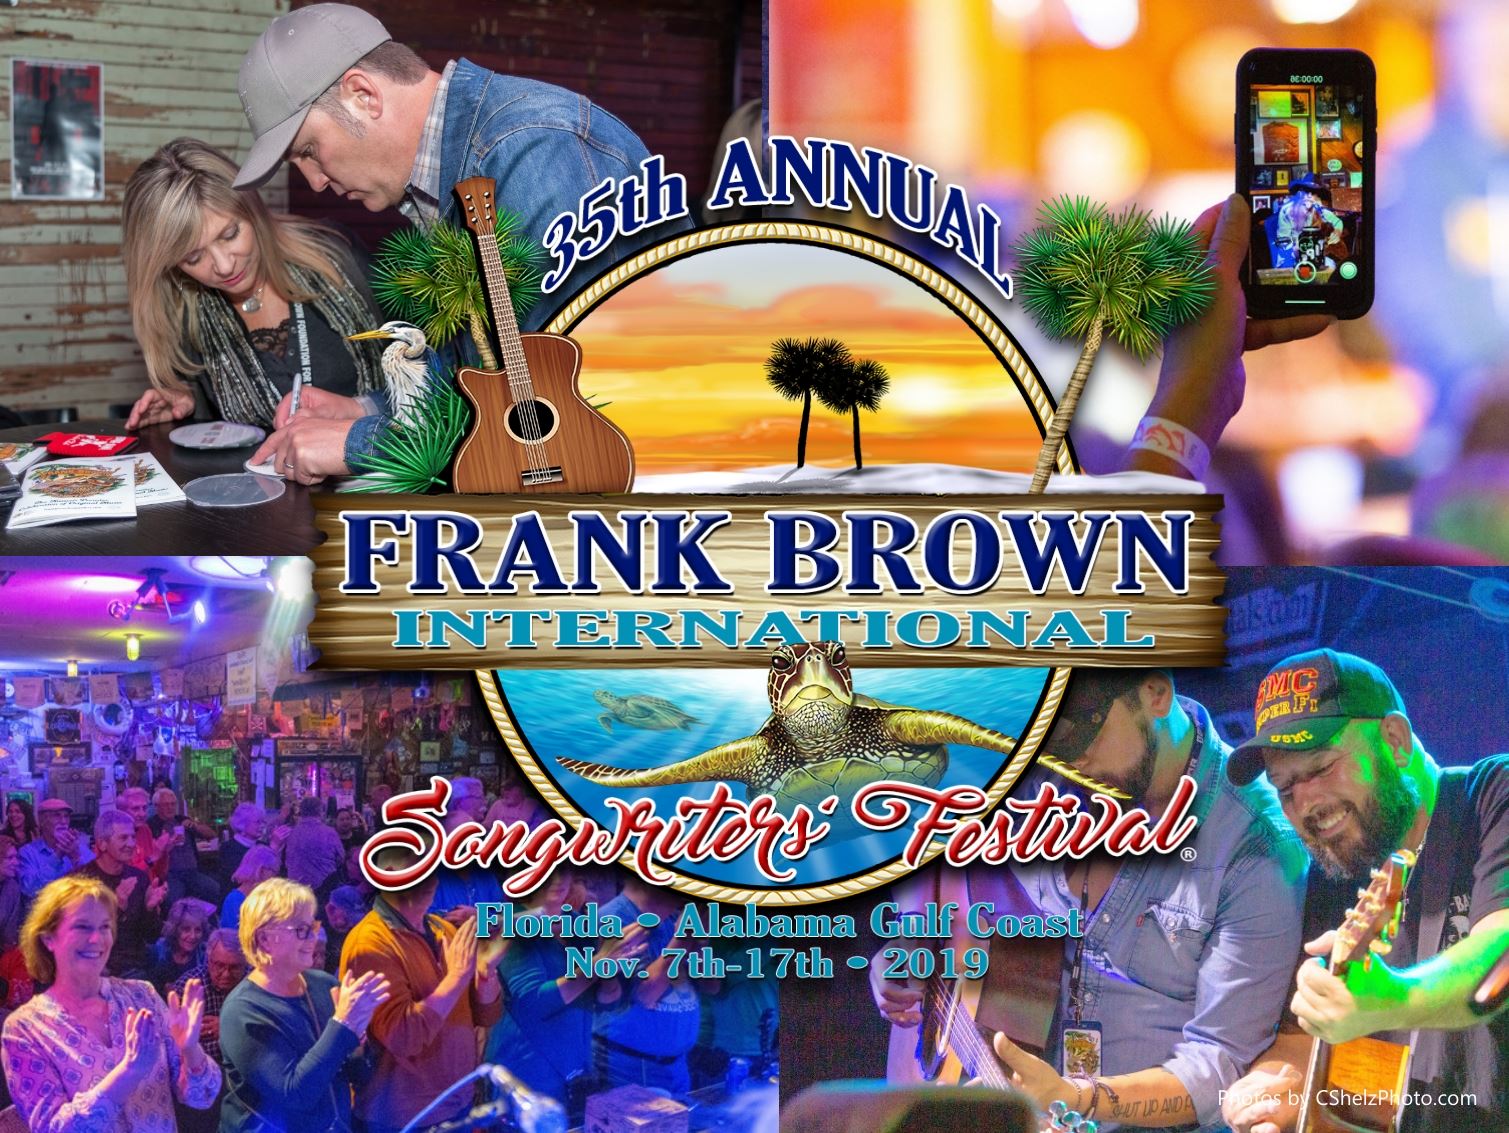 Frank Brown Songwriters Festival